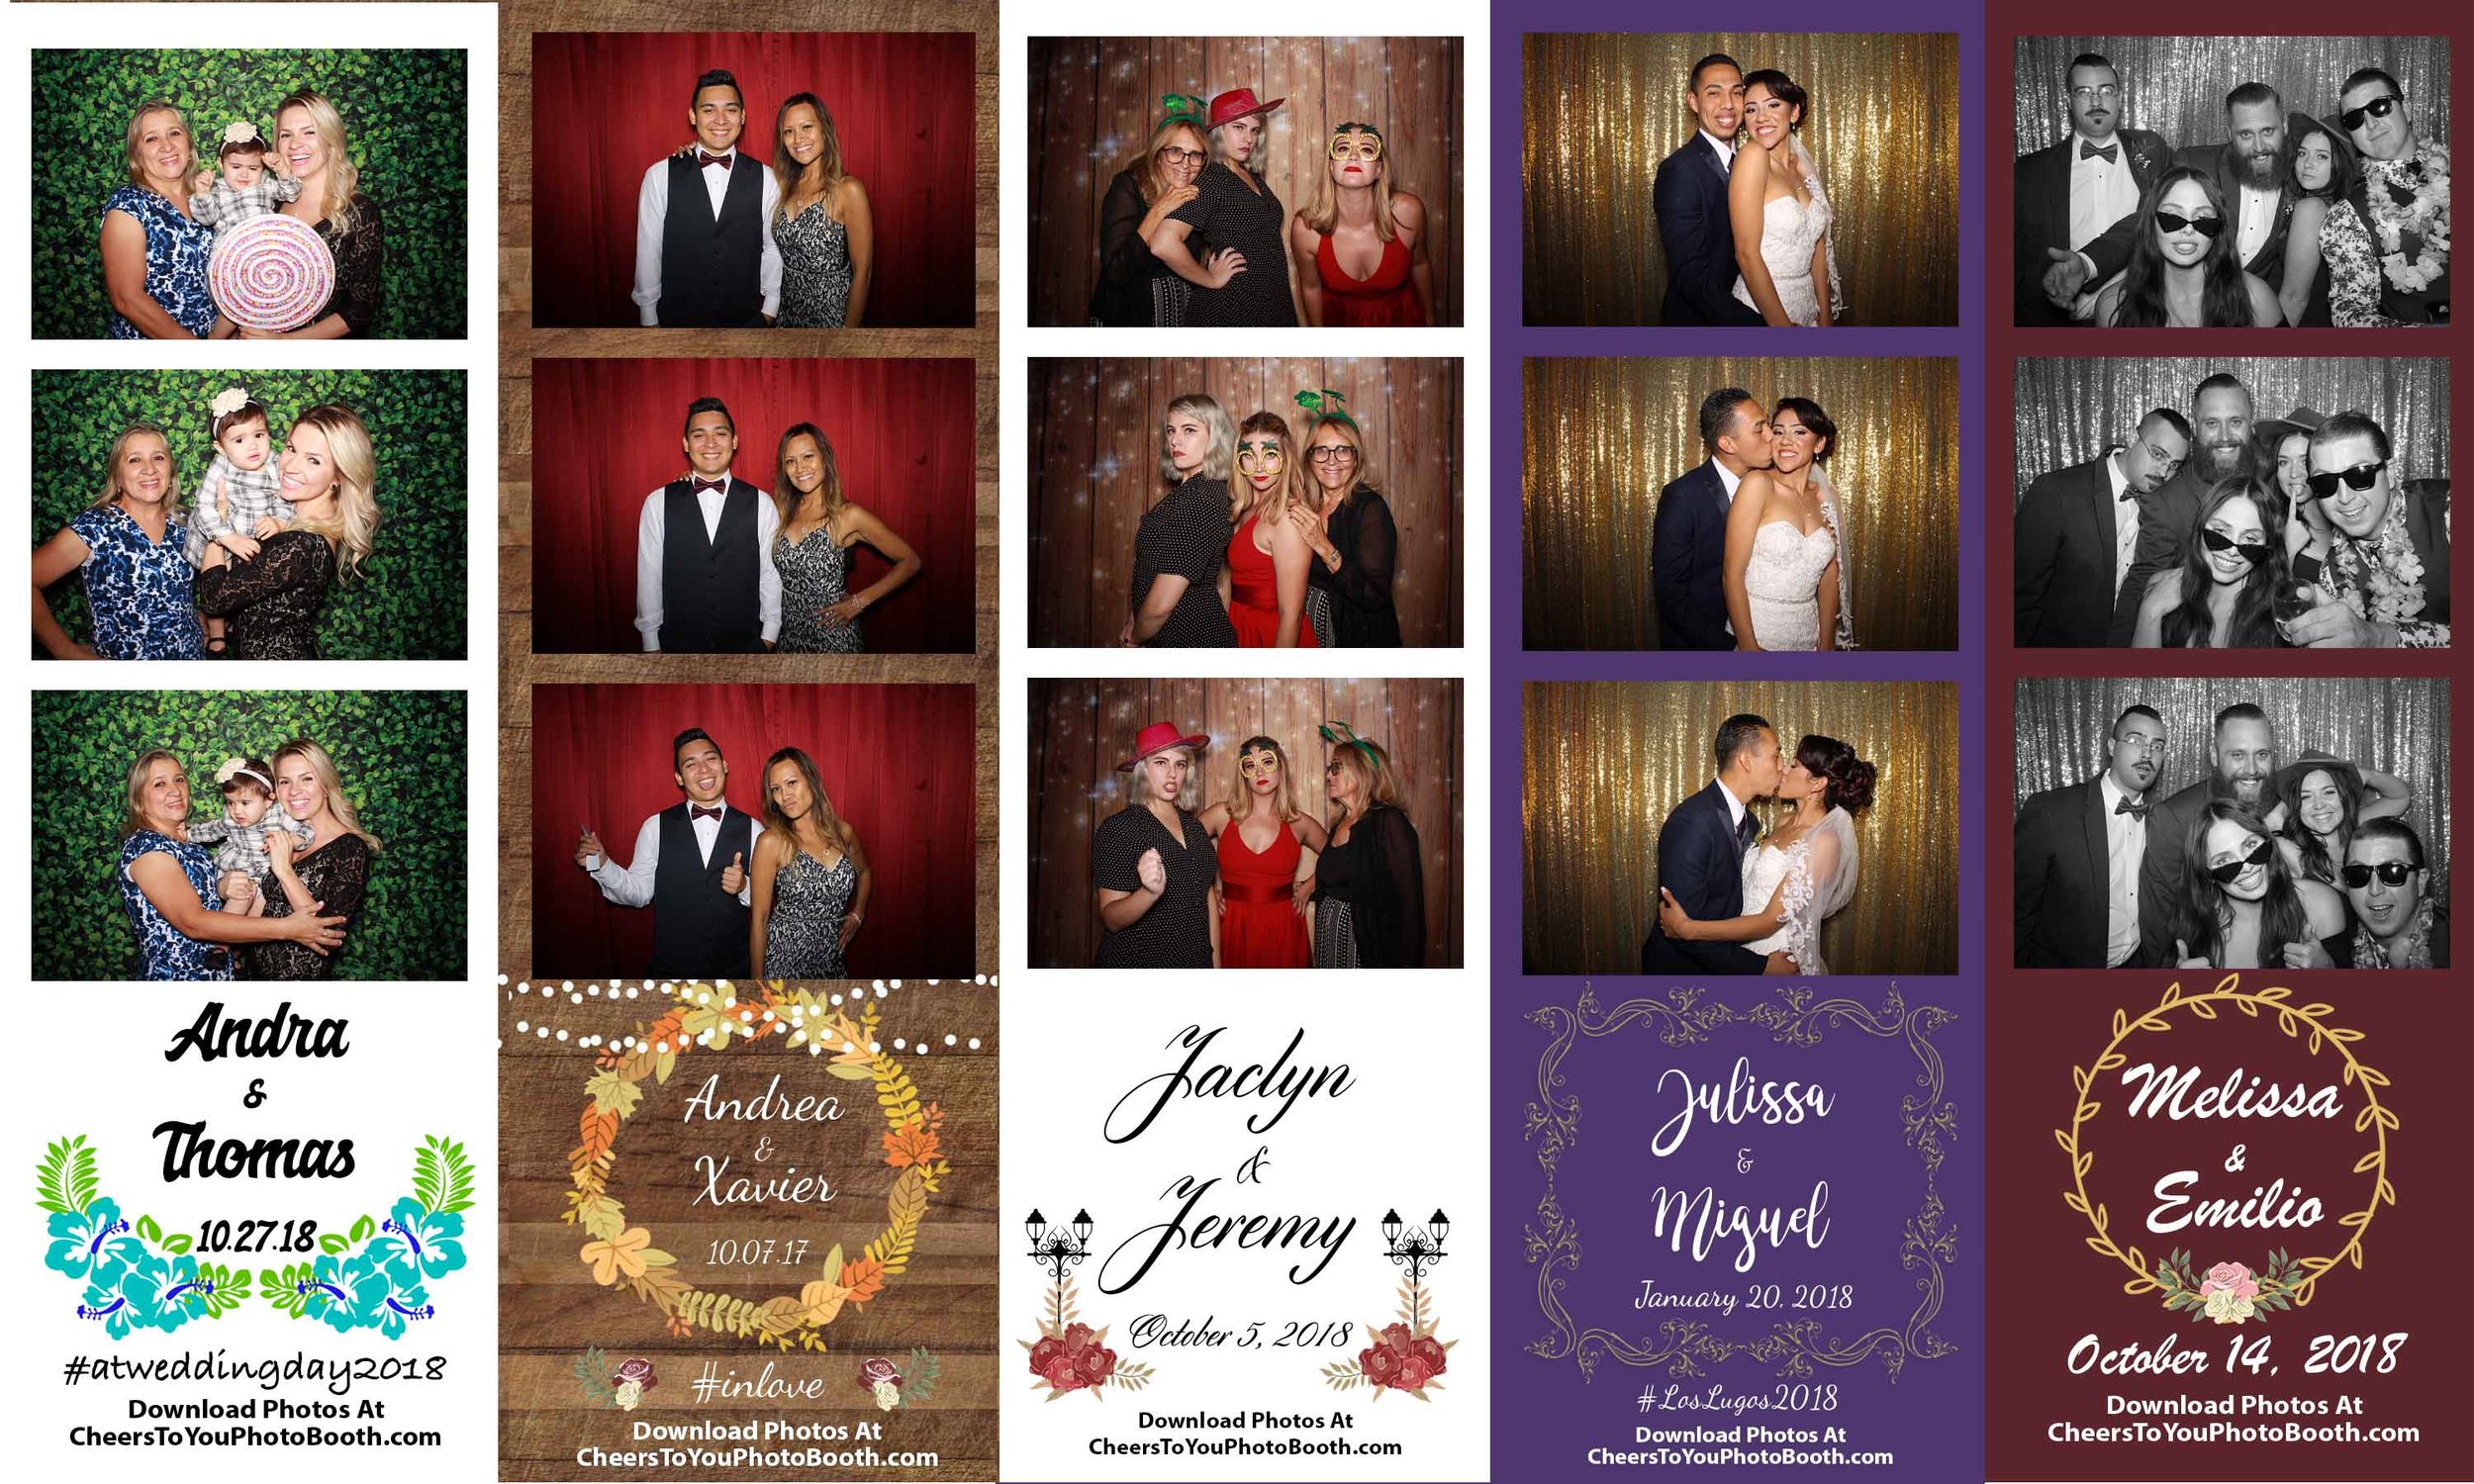 Cheers To You Photo Booth Rentals | Huntington Beach, CA | Orange County, Los Angeles and San Diego